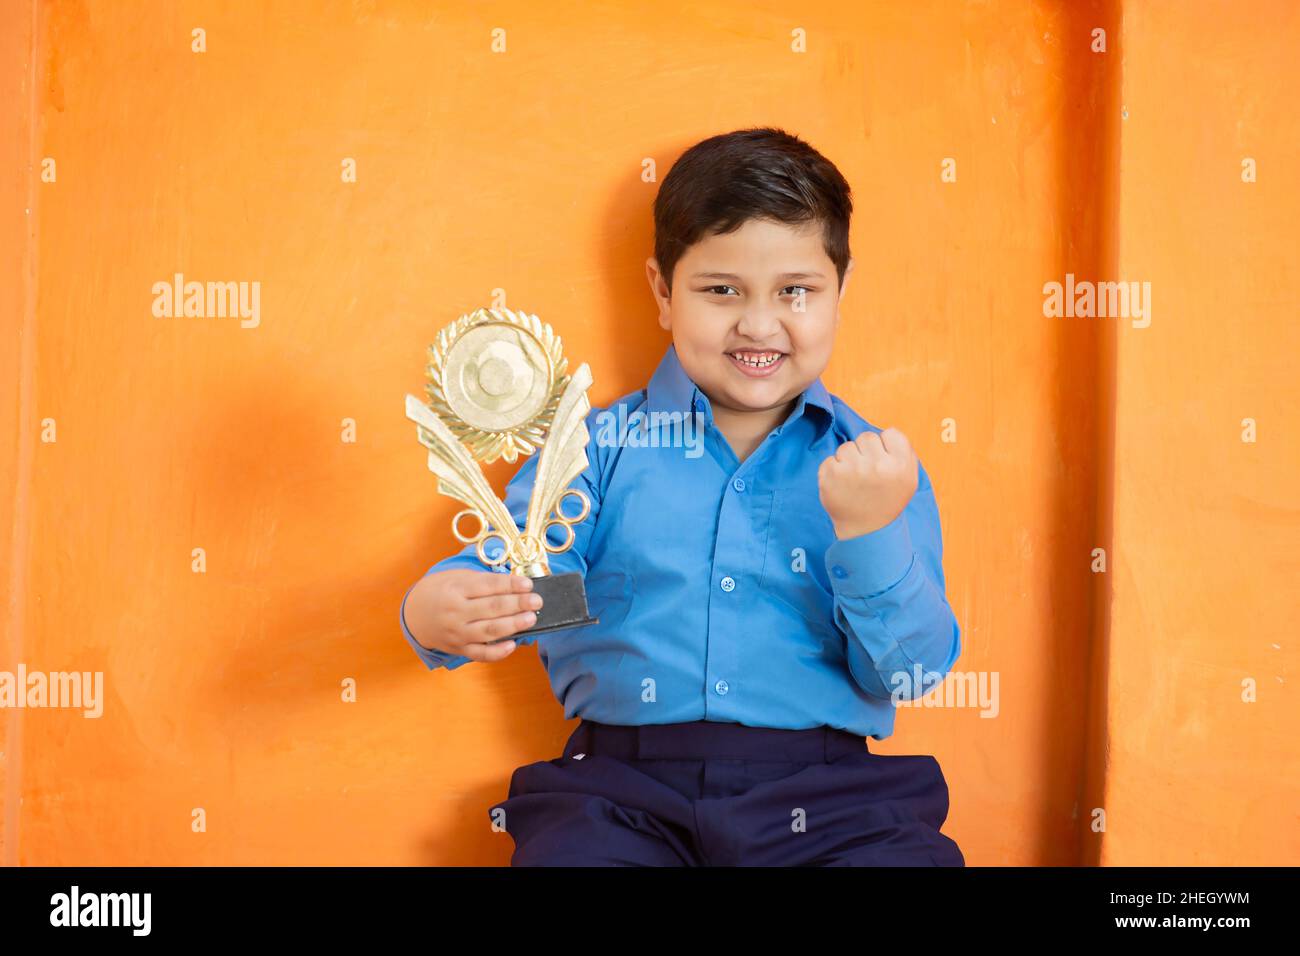 Happy adorable cute indian boy in school uniform celebrating victory with trophy,Cheerful excited male kid holding winning prize against orange backgr Stock Photo